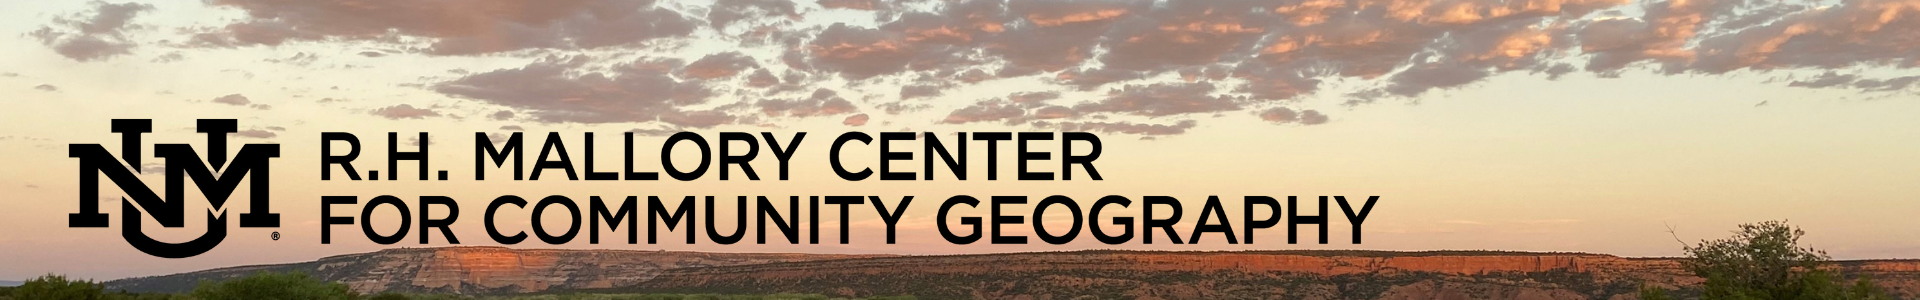 what is a geographical community